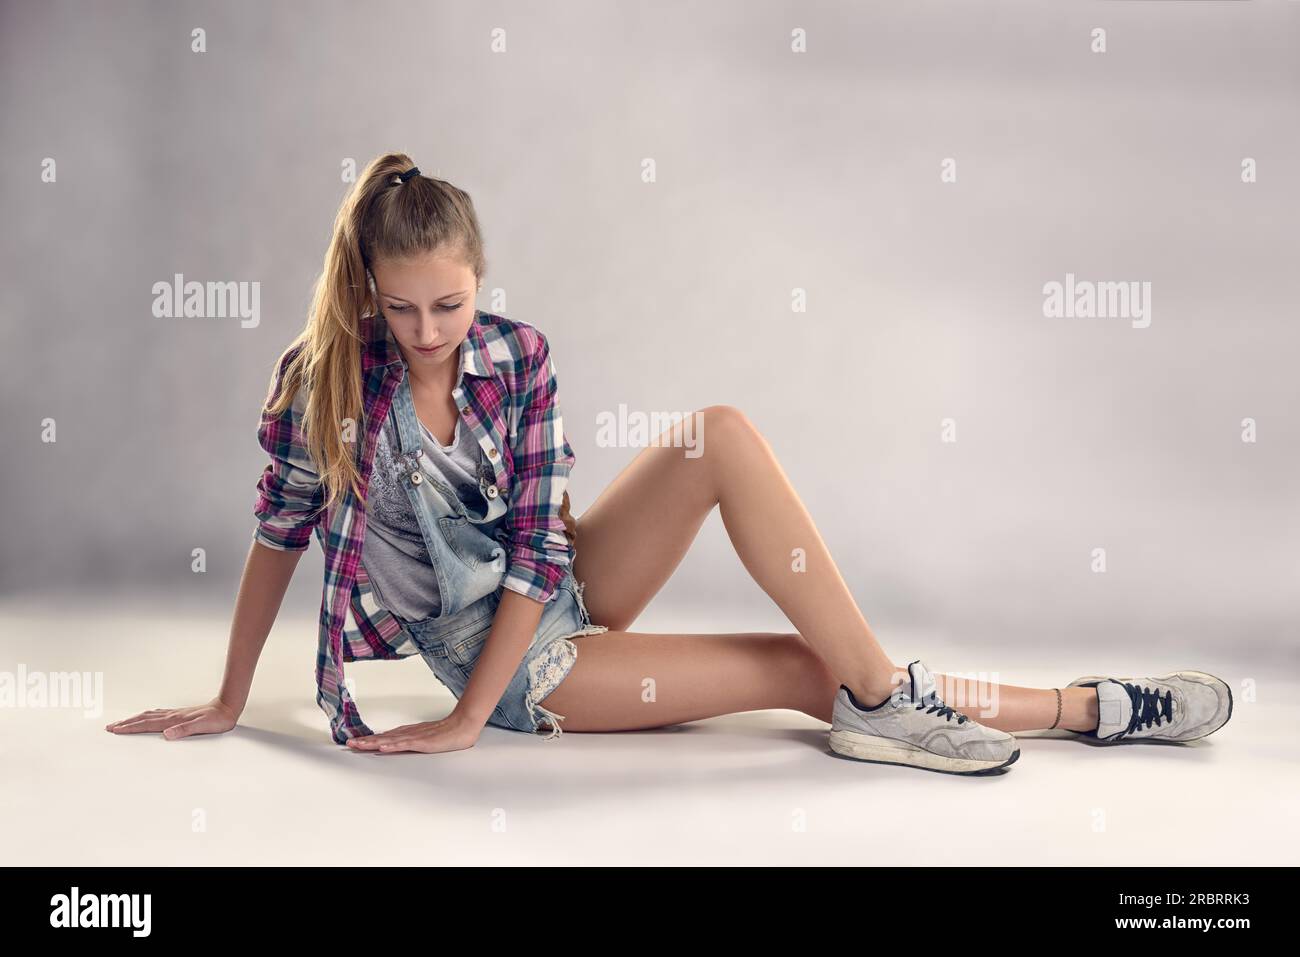 Stylish Young Modern Female Dancer Sitting on the Floor, with a Thoughtful Facial Expression, Against Gray Wall Background Stock Photo